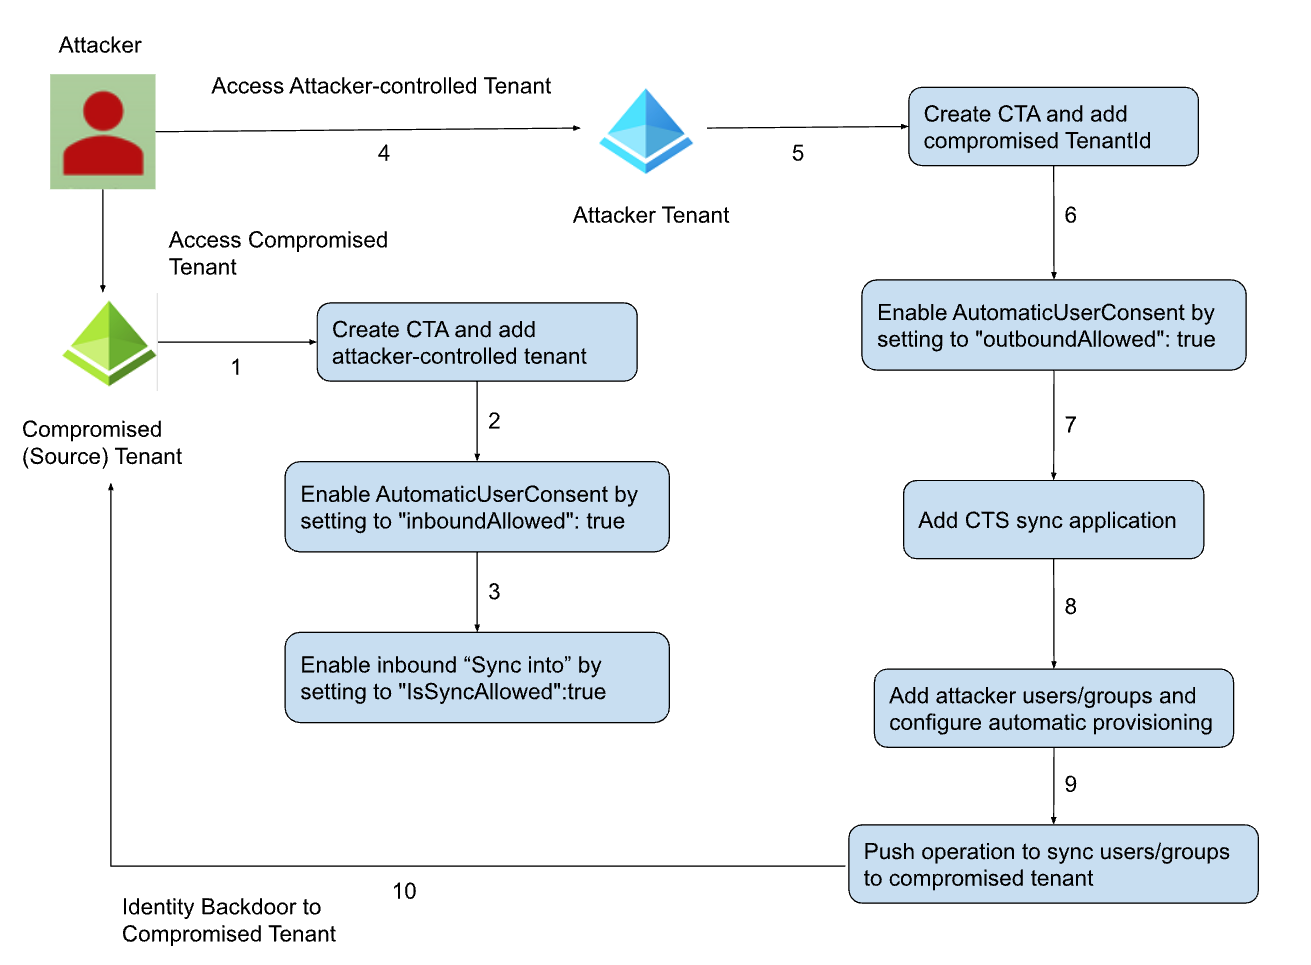 Figure 6. Identity backdoor in compromised tenant using CTS